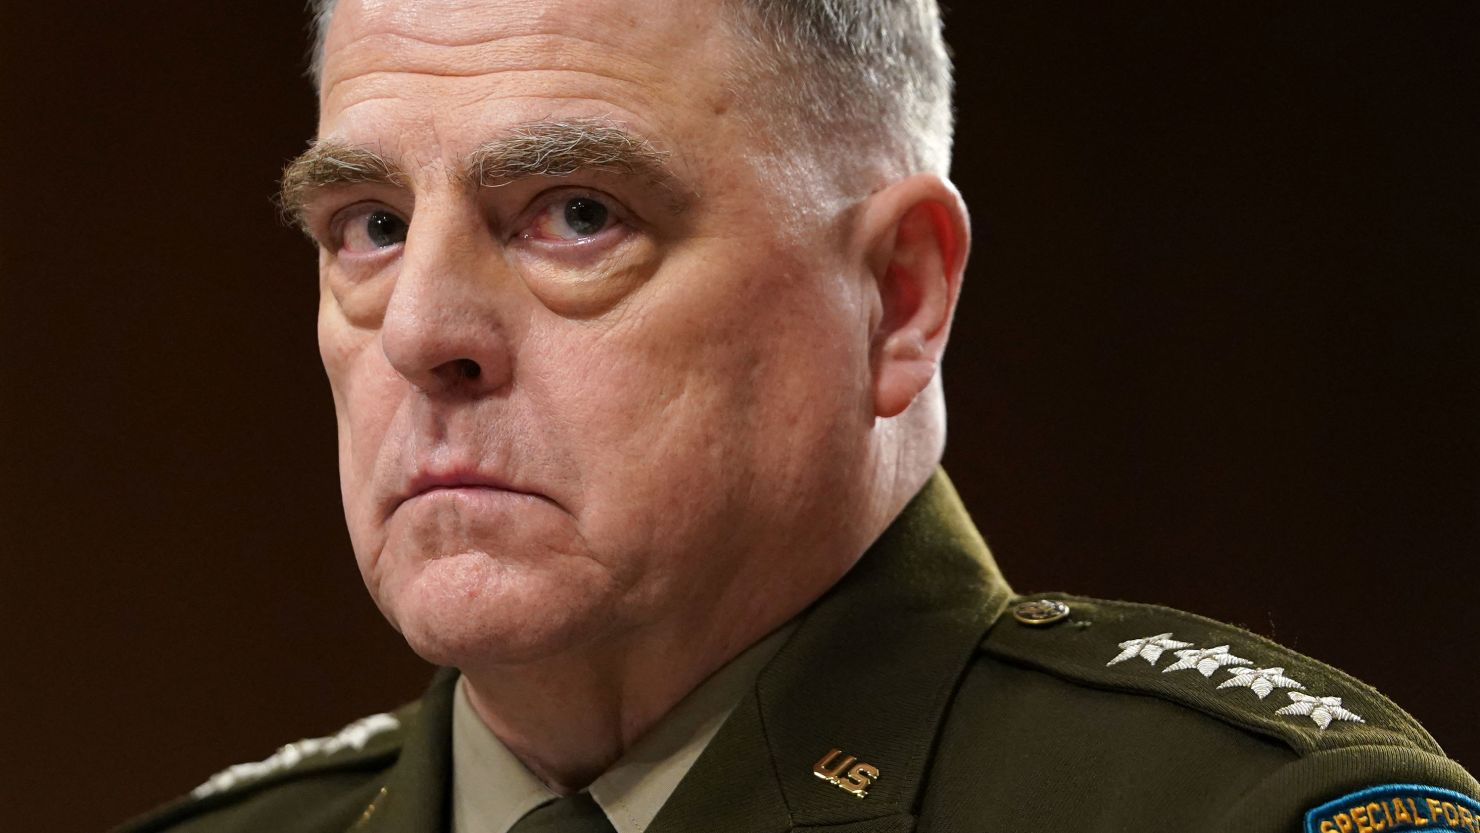 Chairman of the Joint Chiefs of Staff Gen. Mark Milley testifies before a Senate Armed Services Committee hearing on Capitol Hill in Washington on March 28, 2023.